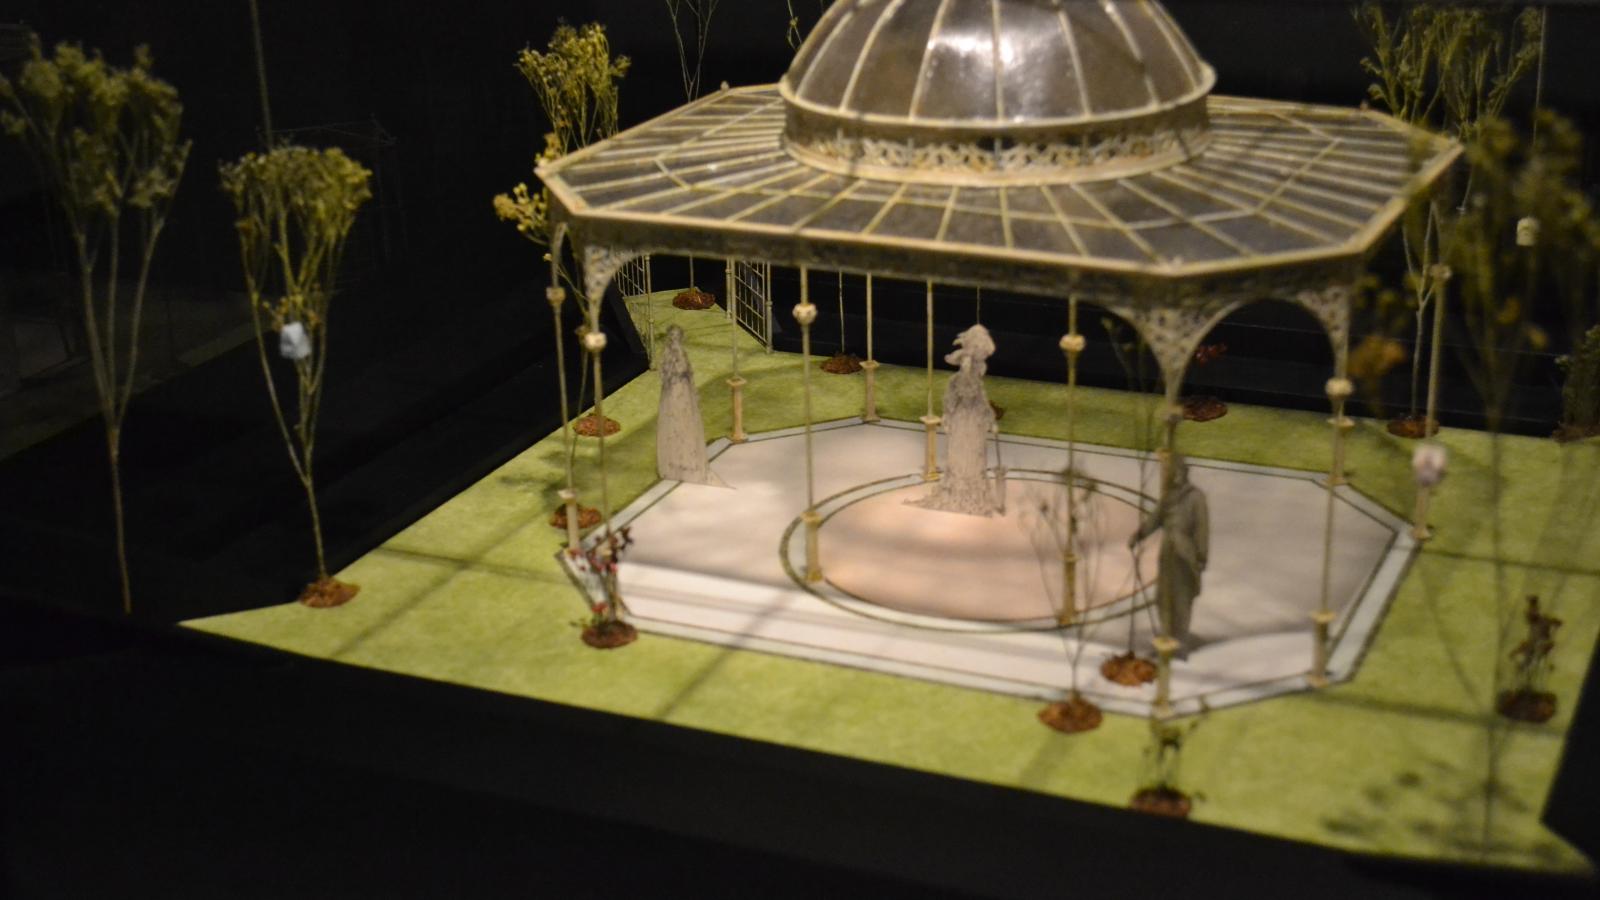 Tony Straiges: "Glass Pergola," Design Model for The Importance of Being Earnest, Arena Theatre, Washington, DC. Director: Richard Russell Ramos, Tony Straiges Design Collection, Theatre Research Institute, 1983